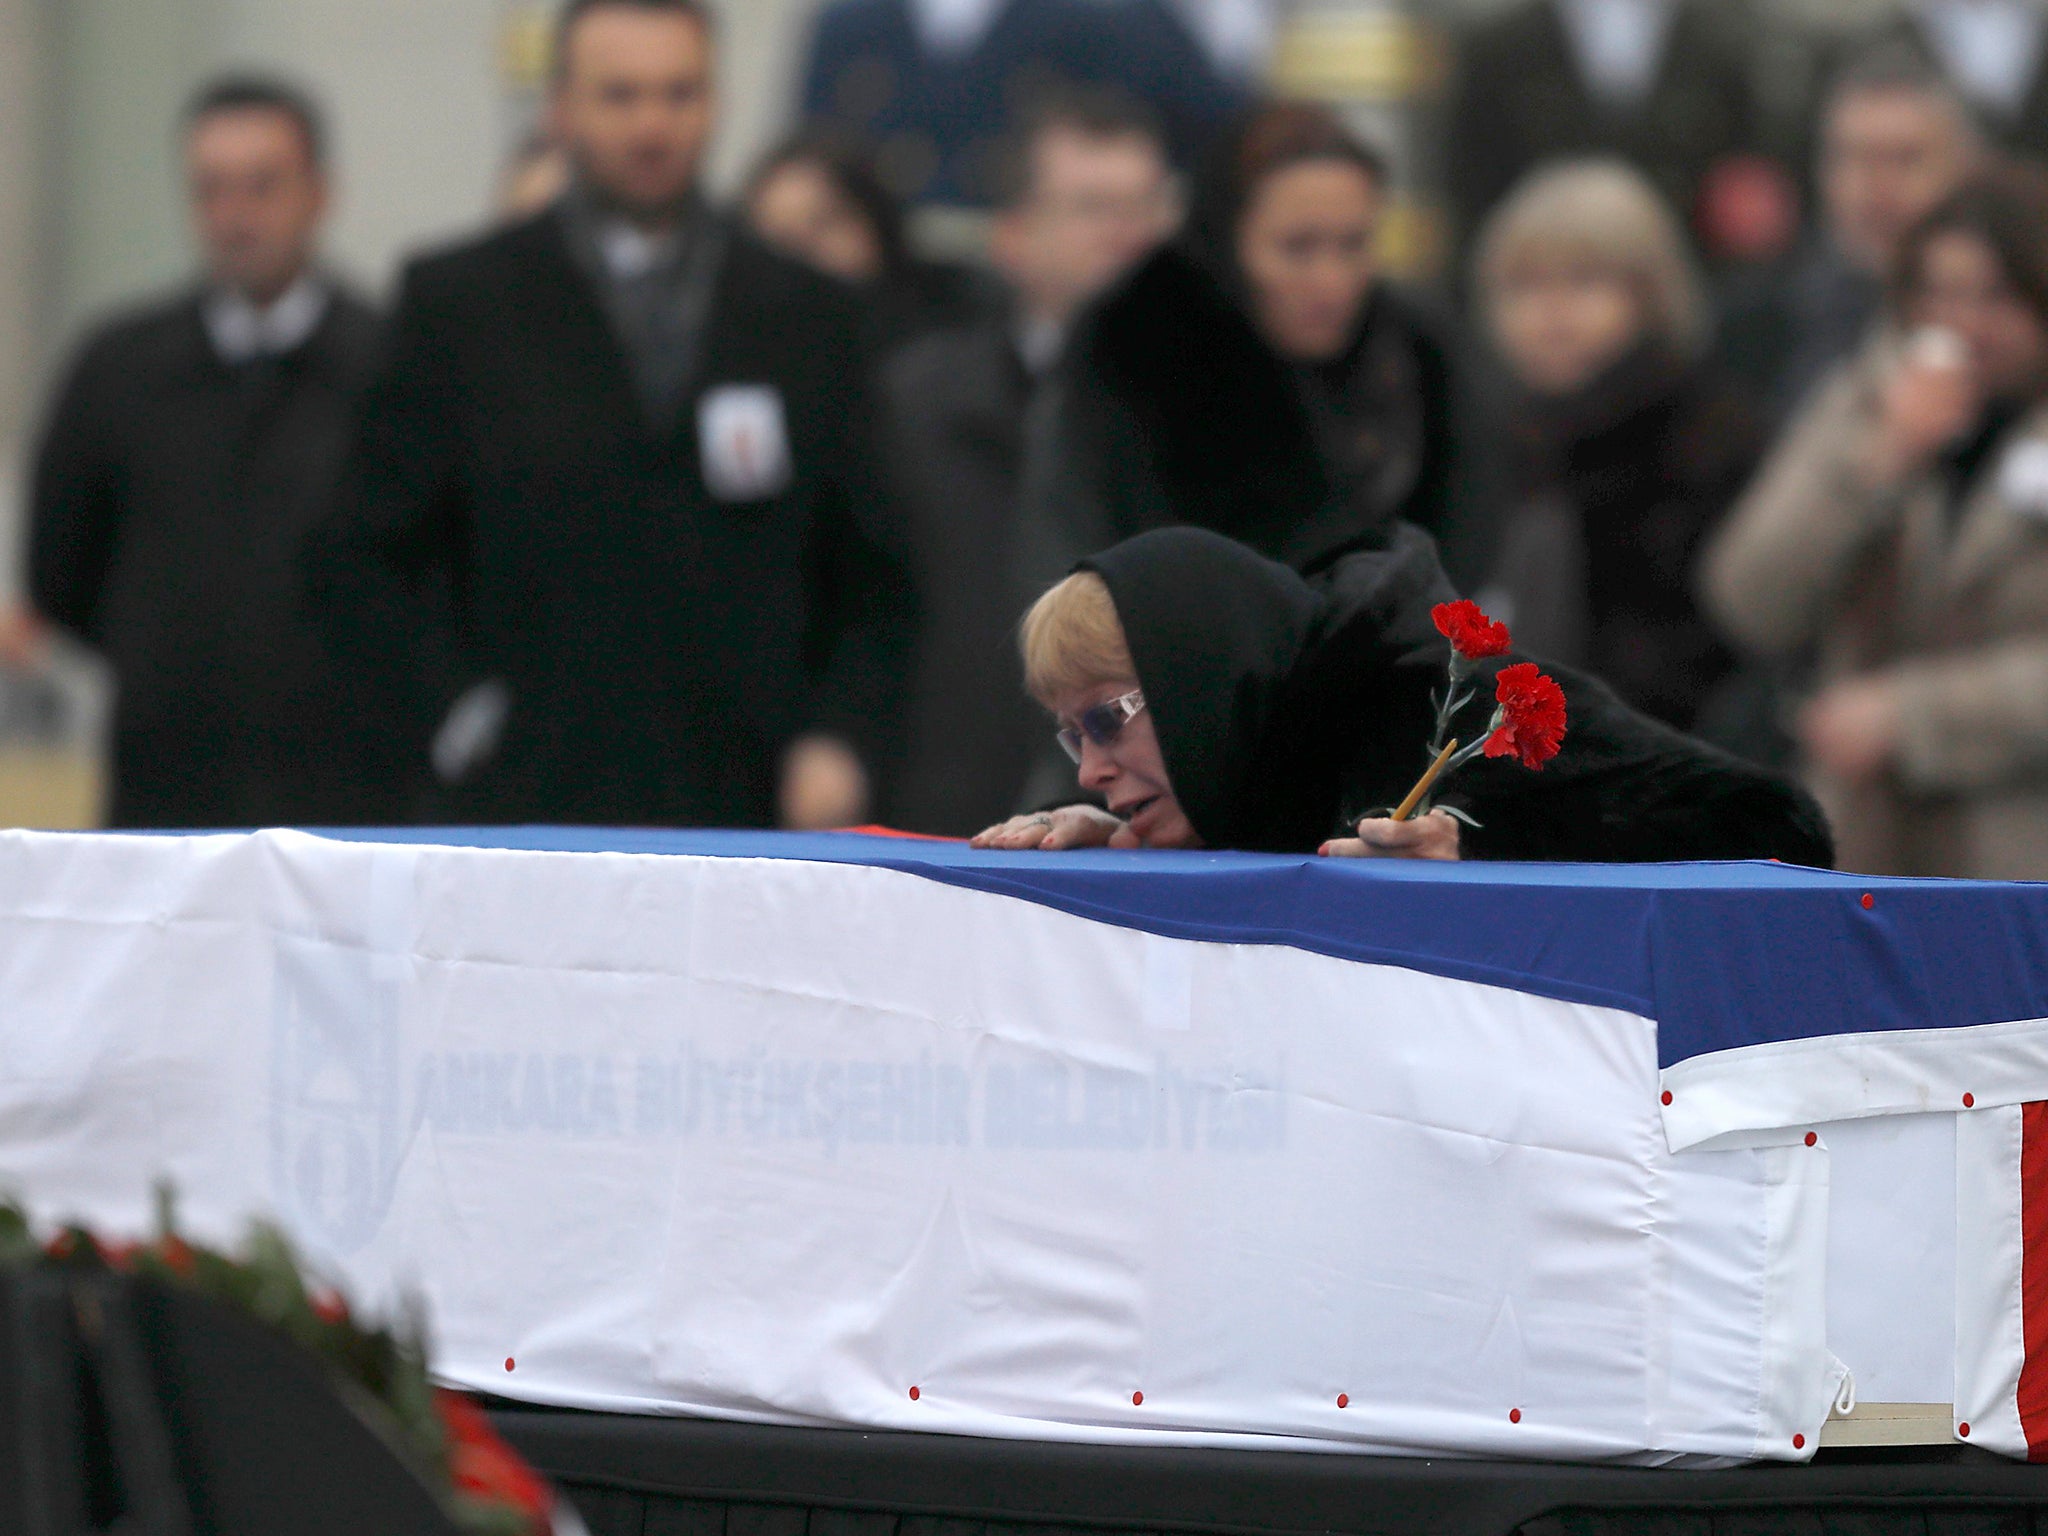 Late Russian Ambassador to Turkey Andrei Karlov's wife Marina mourns next to the flag-wrapped coffin during a ceremony at Esenboga airport in Ankara, Turkey